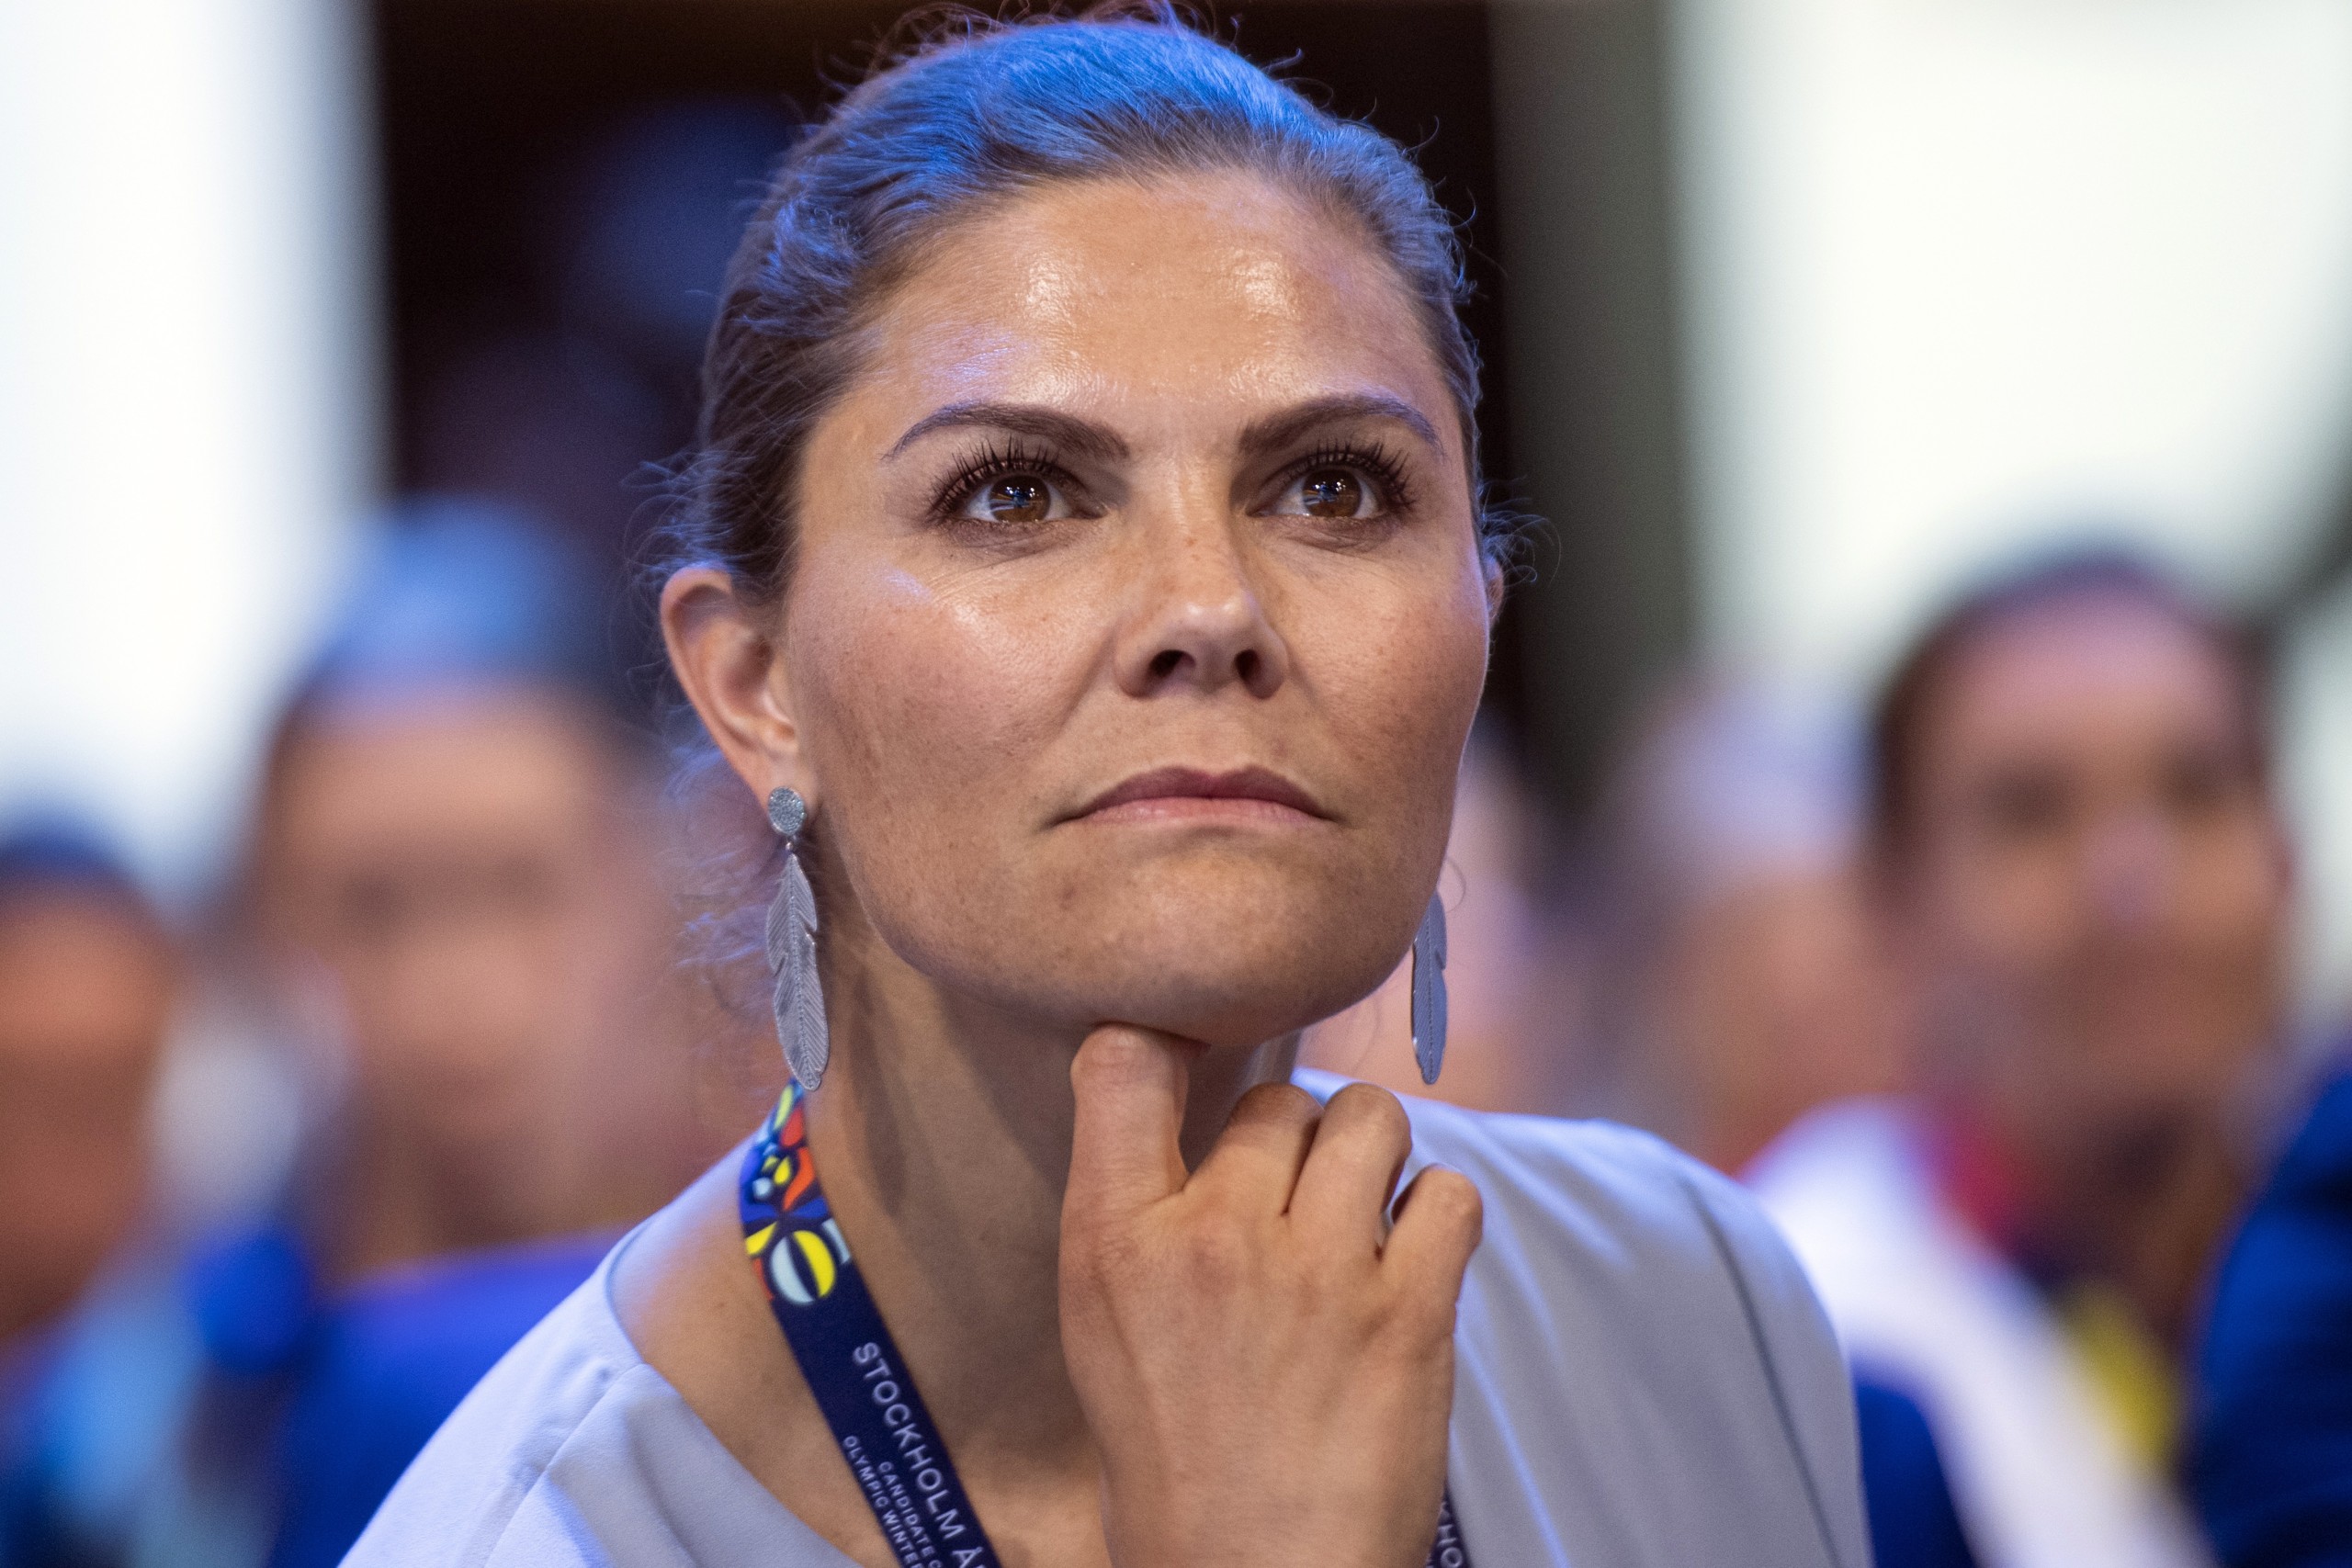 epa09673975 (FILE) - Crown Princess Victoria from Sweden, member of the candidate for the Olympic Winter Games 2026 Stockholm-Are delegation, attends the 134th Session of the International Olympic Committee (IOC), in Lausanne, Switzerland, 24 June 2019 (reissued 08 January 2022). According to the Swedish Royal Court, Crown Princess Victoria tested positive for COVID-19.  EPA/JEAN-CHRISTOPHE BOTT